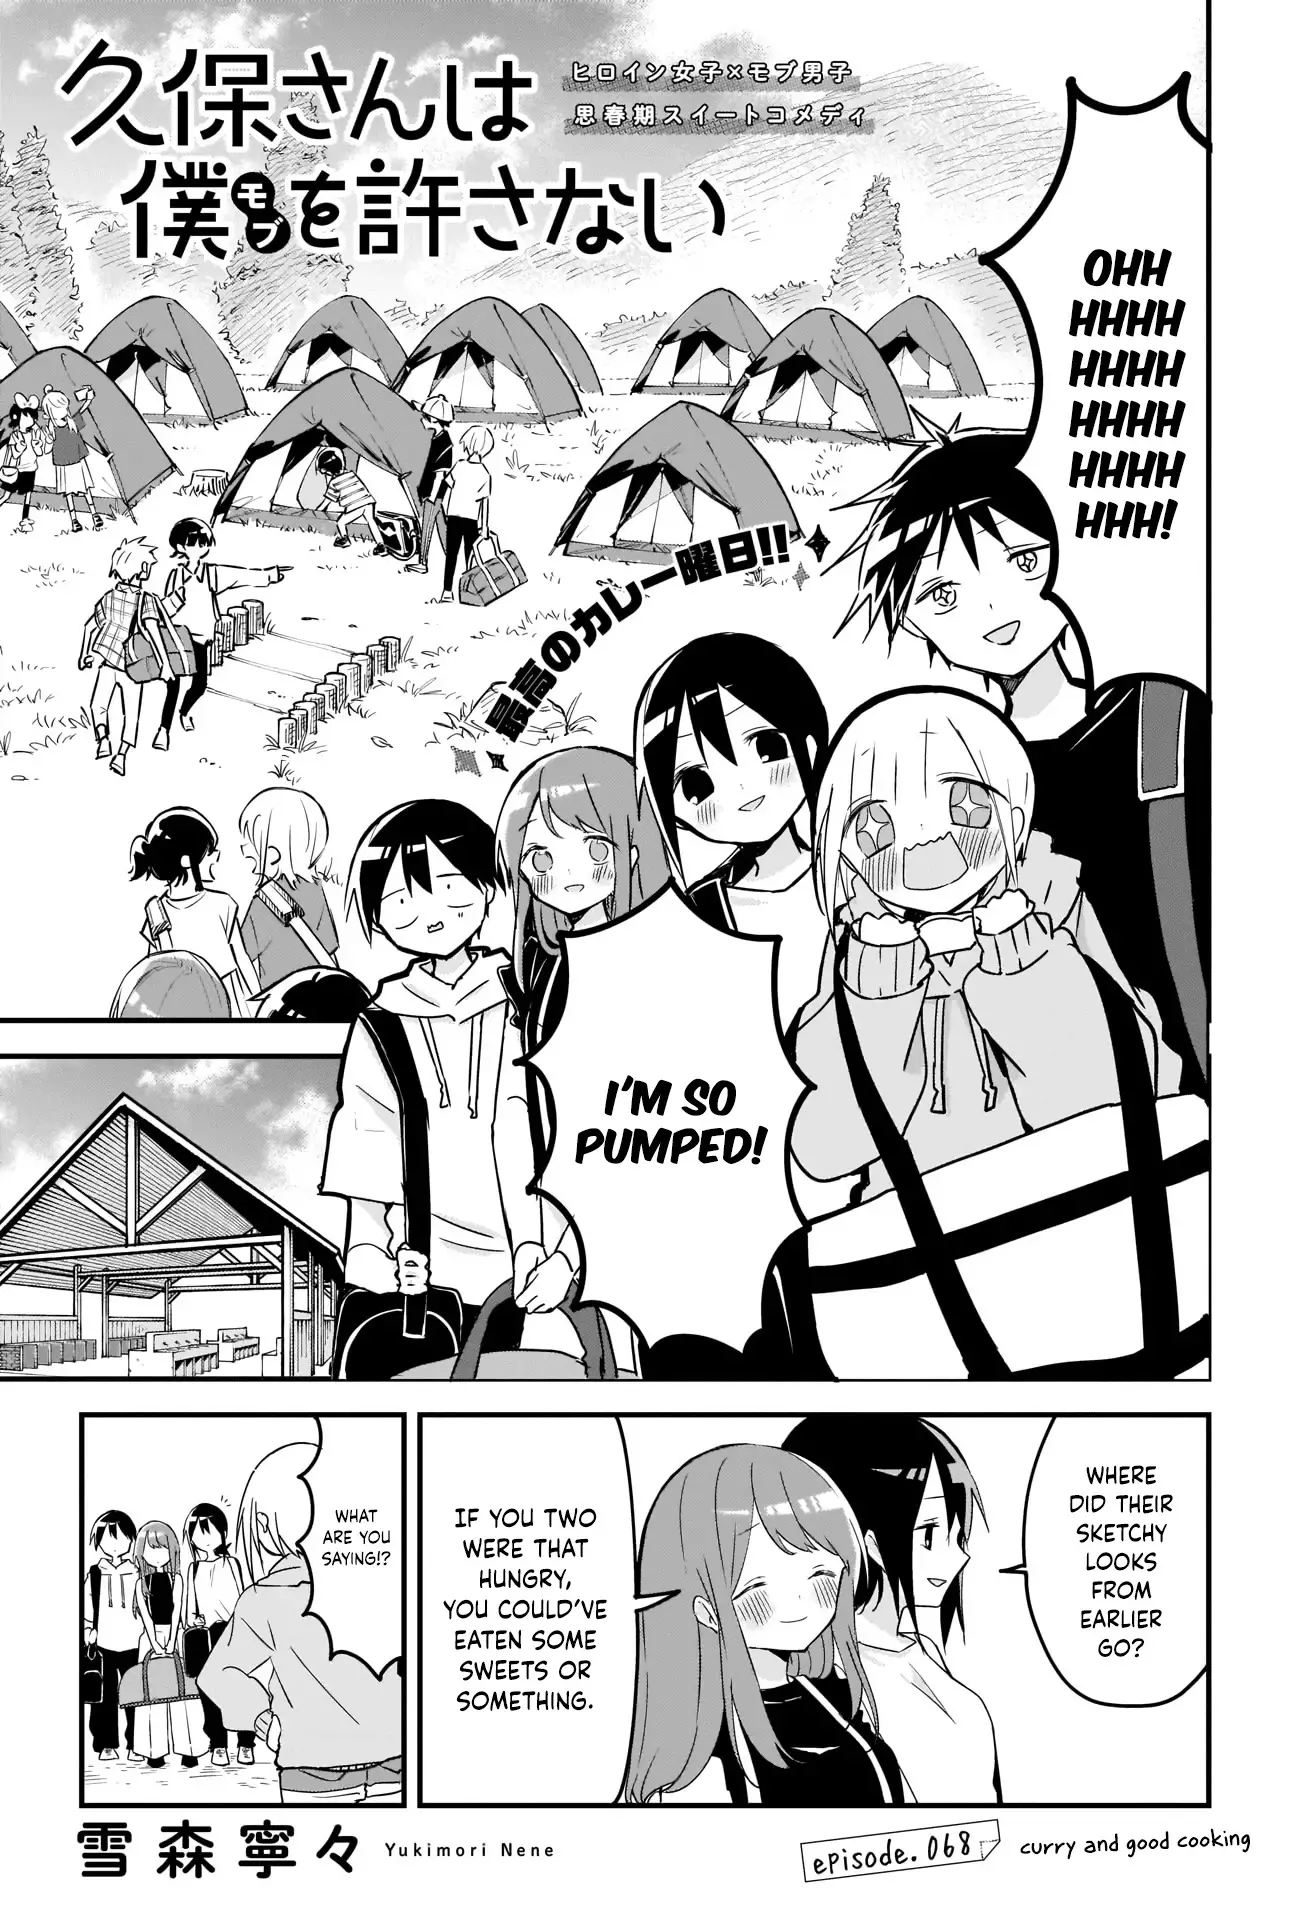 Kubo-San Doesn't Leave Me Be (A Mob) - 68 page 1